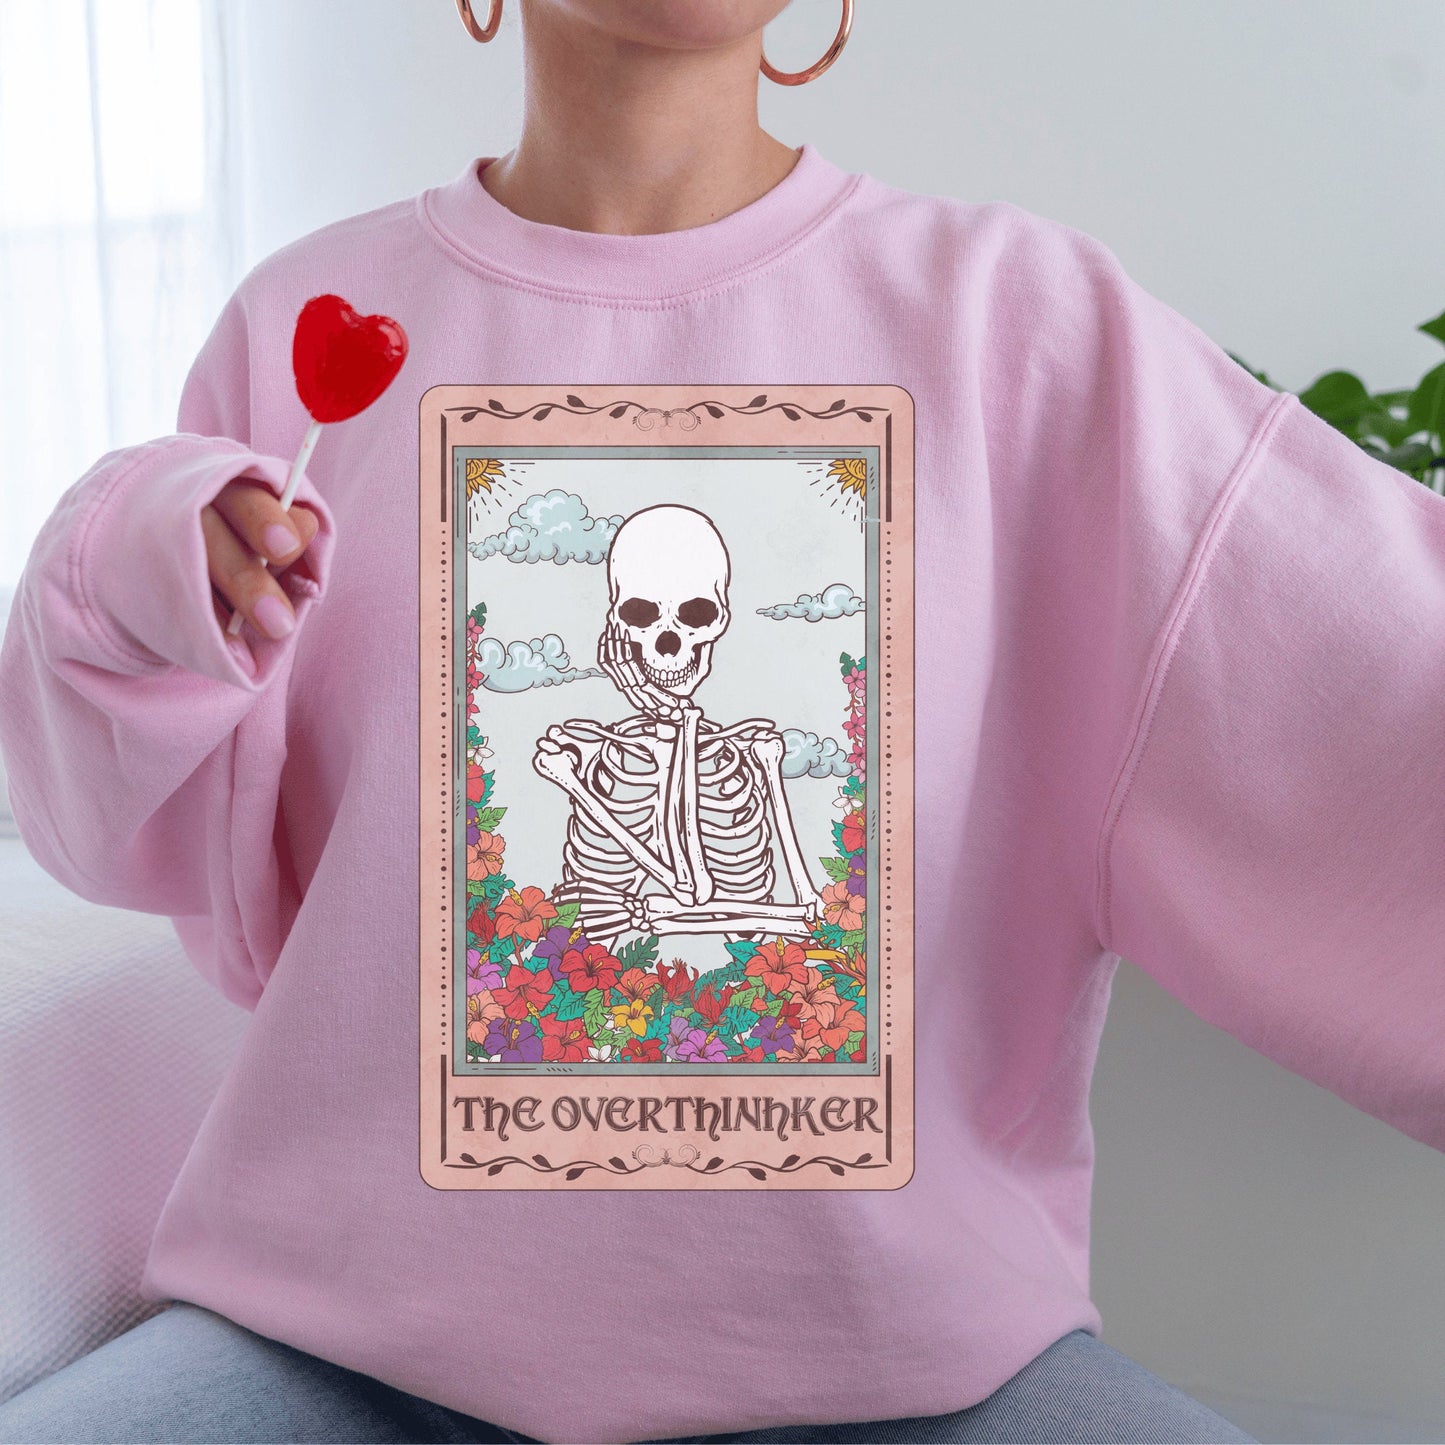 pink unisex overthinker sweatshirt with a graphic of a tarot card with skeleton graphic that says the overthinker